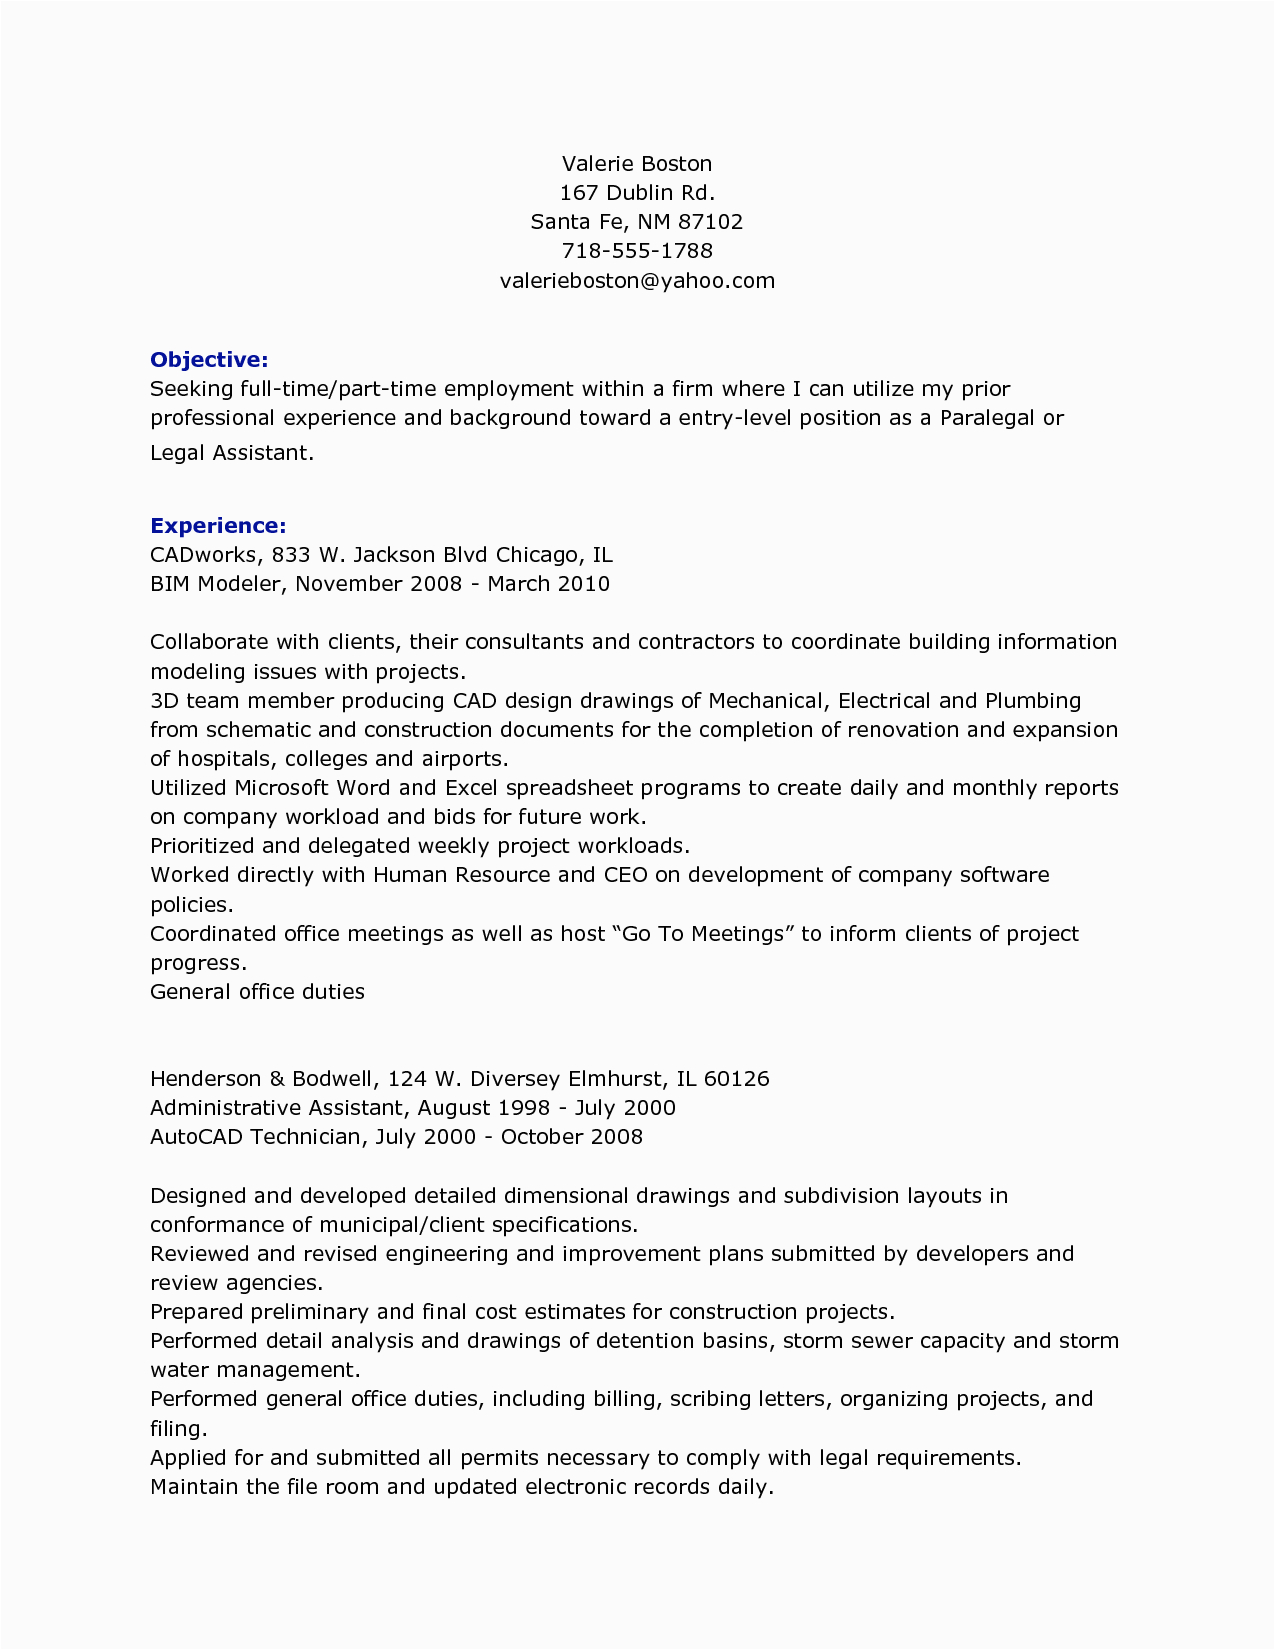 Sample Resume for Personal Injury Legal assistant Personal Injury Paralegal Resume